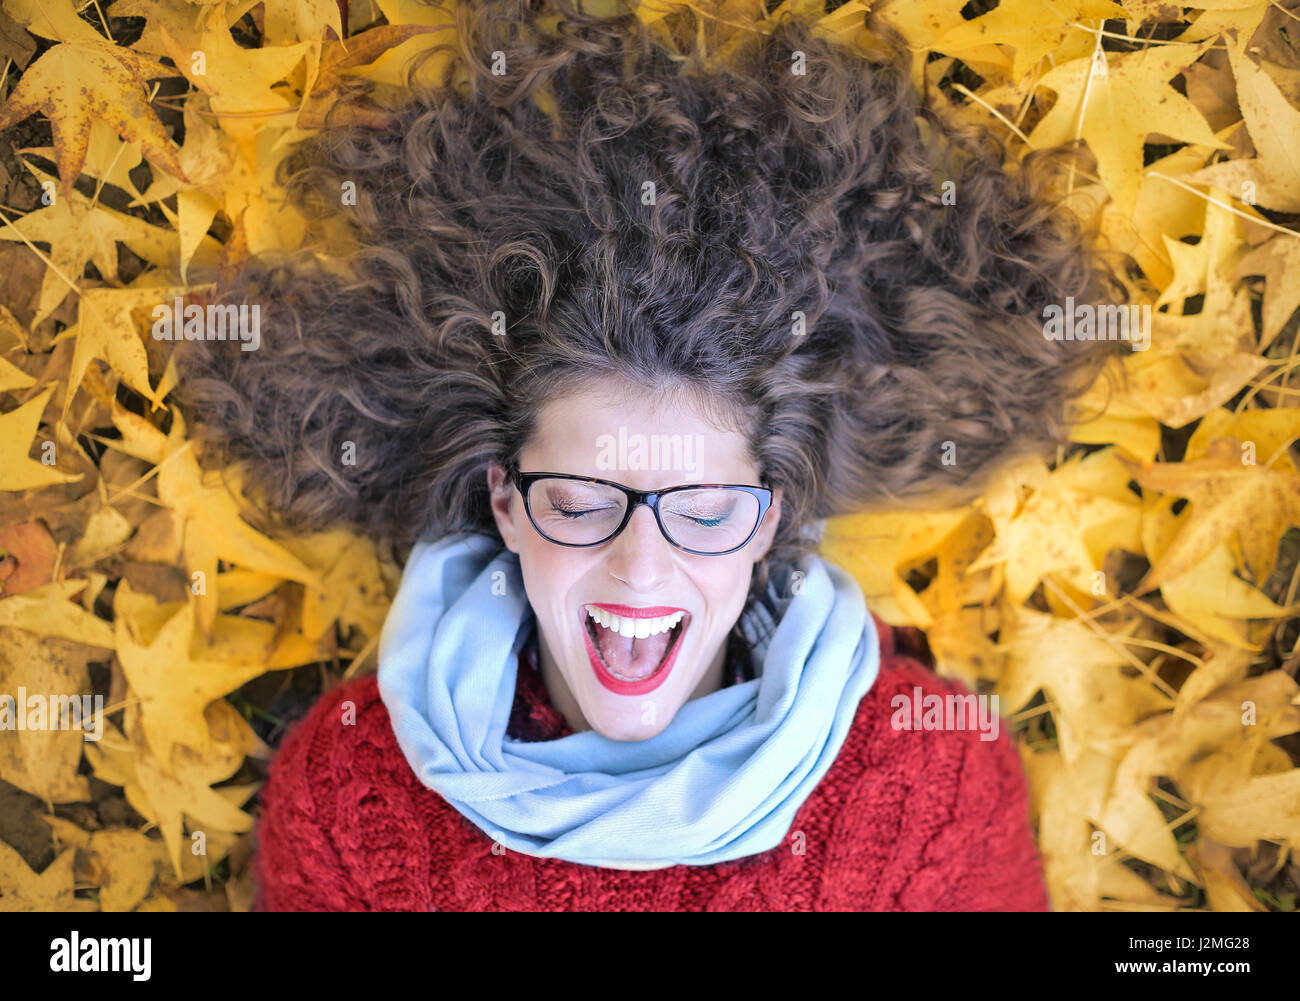 Smiling woman laying on leaves Stock Photo